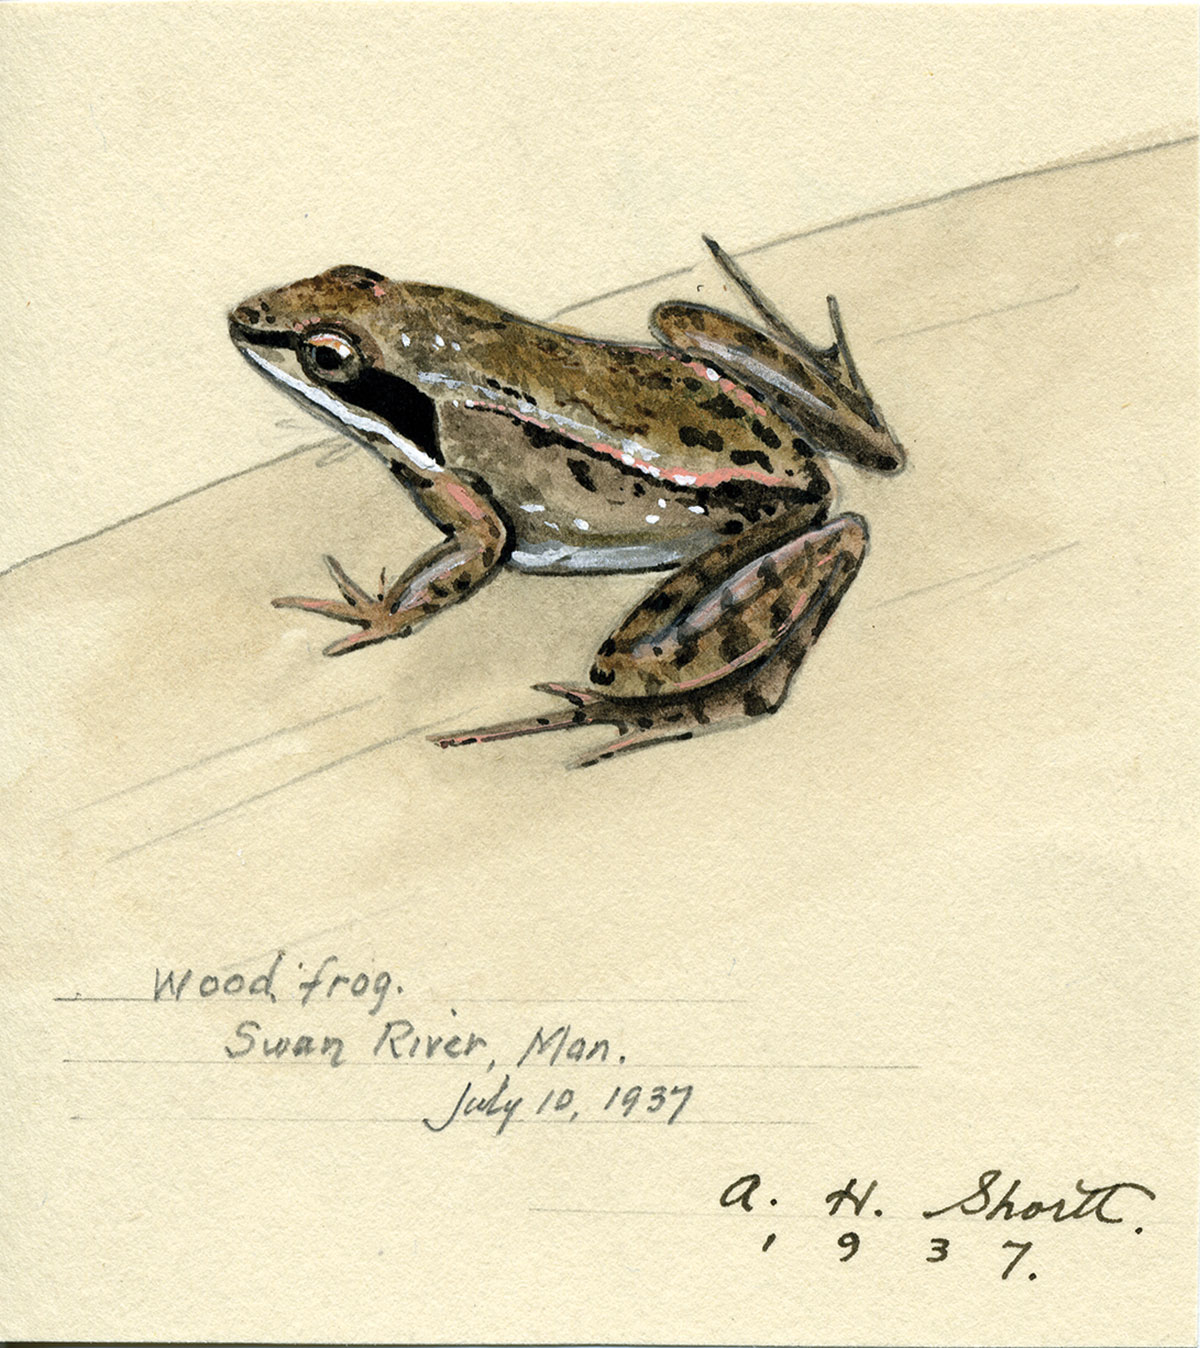 An illustration of a frog.